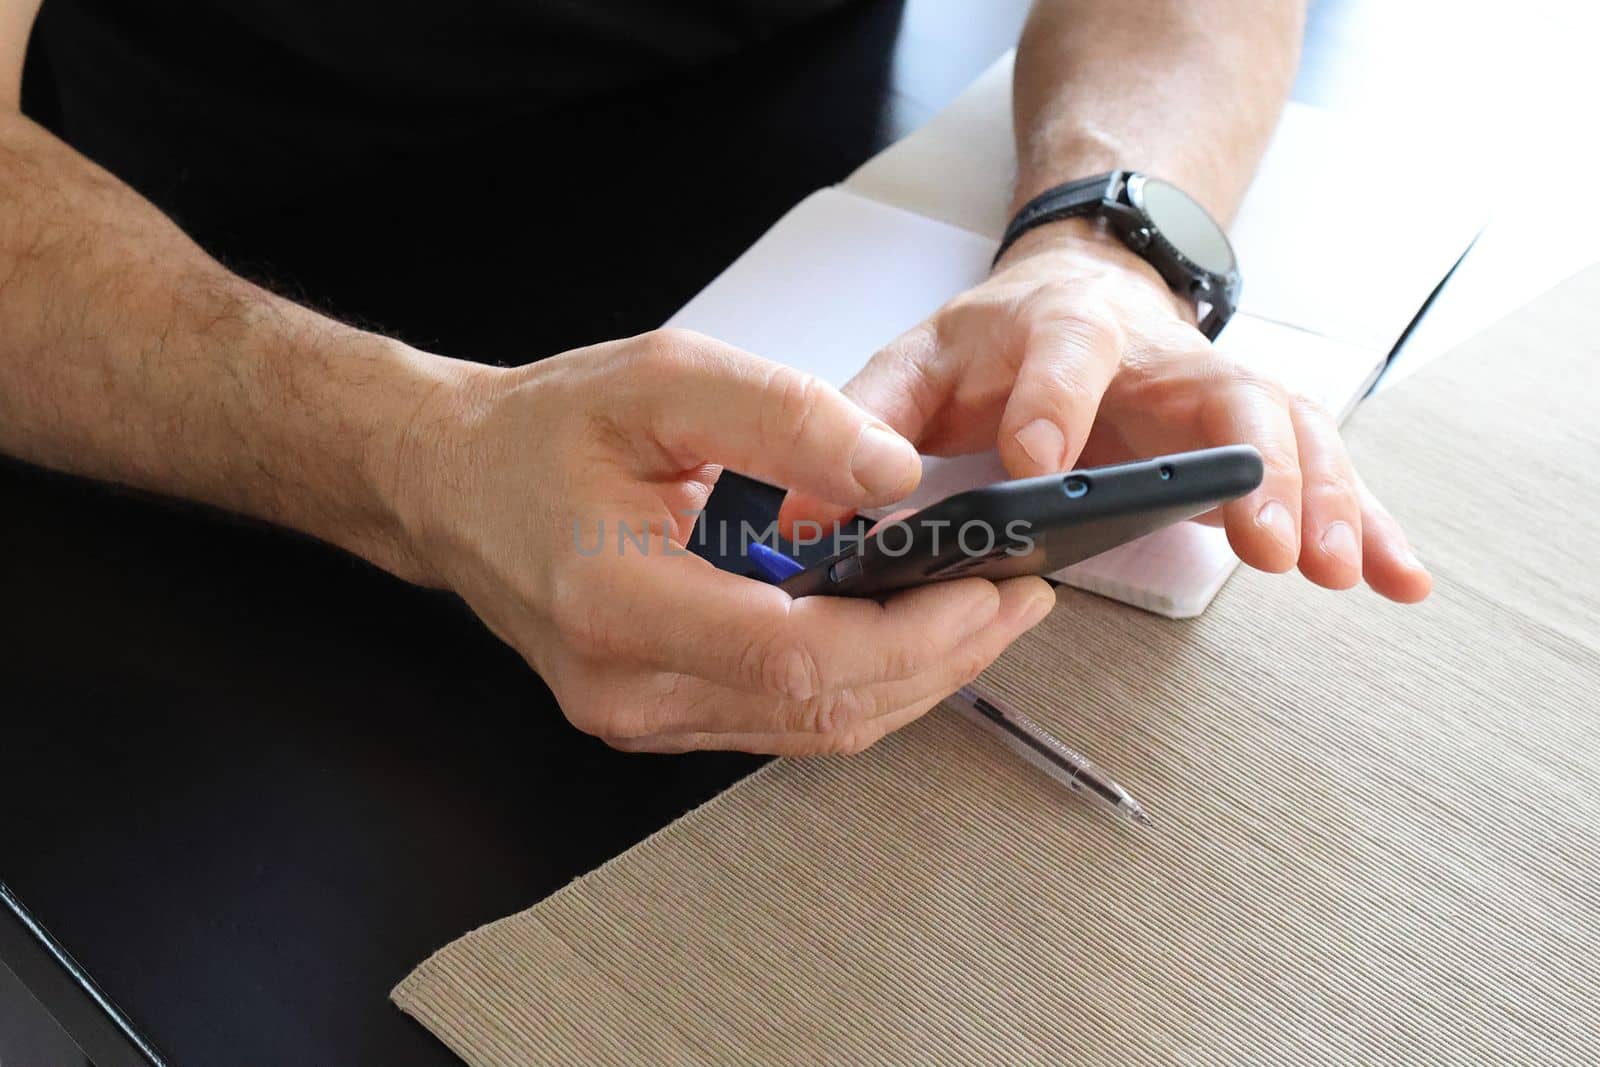 Close-up of the hands of a man with a smart watch on his hand, who is holding a black phone, looking for something. Black table with notepad and pen. Remote work concept.